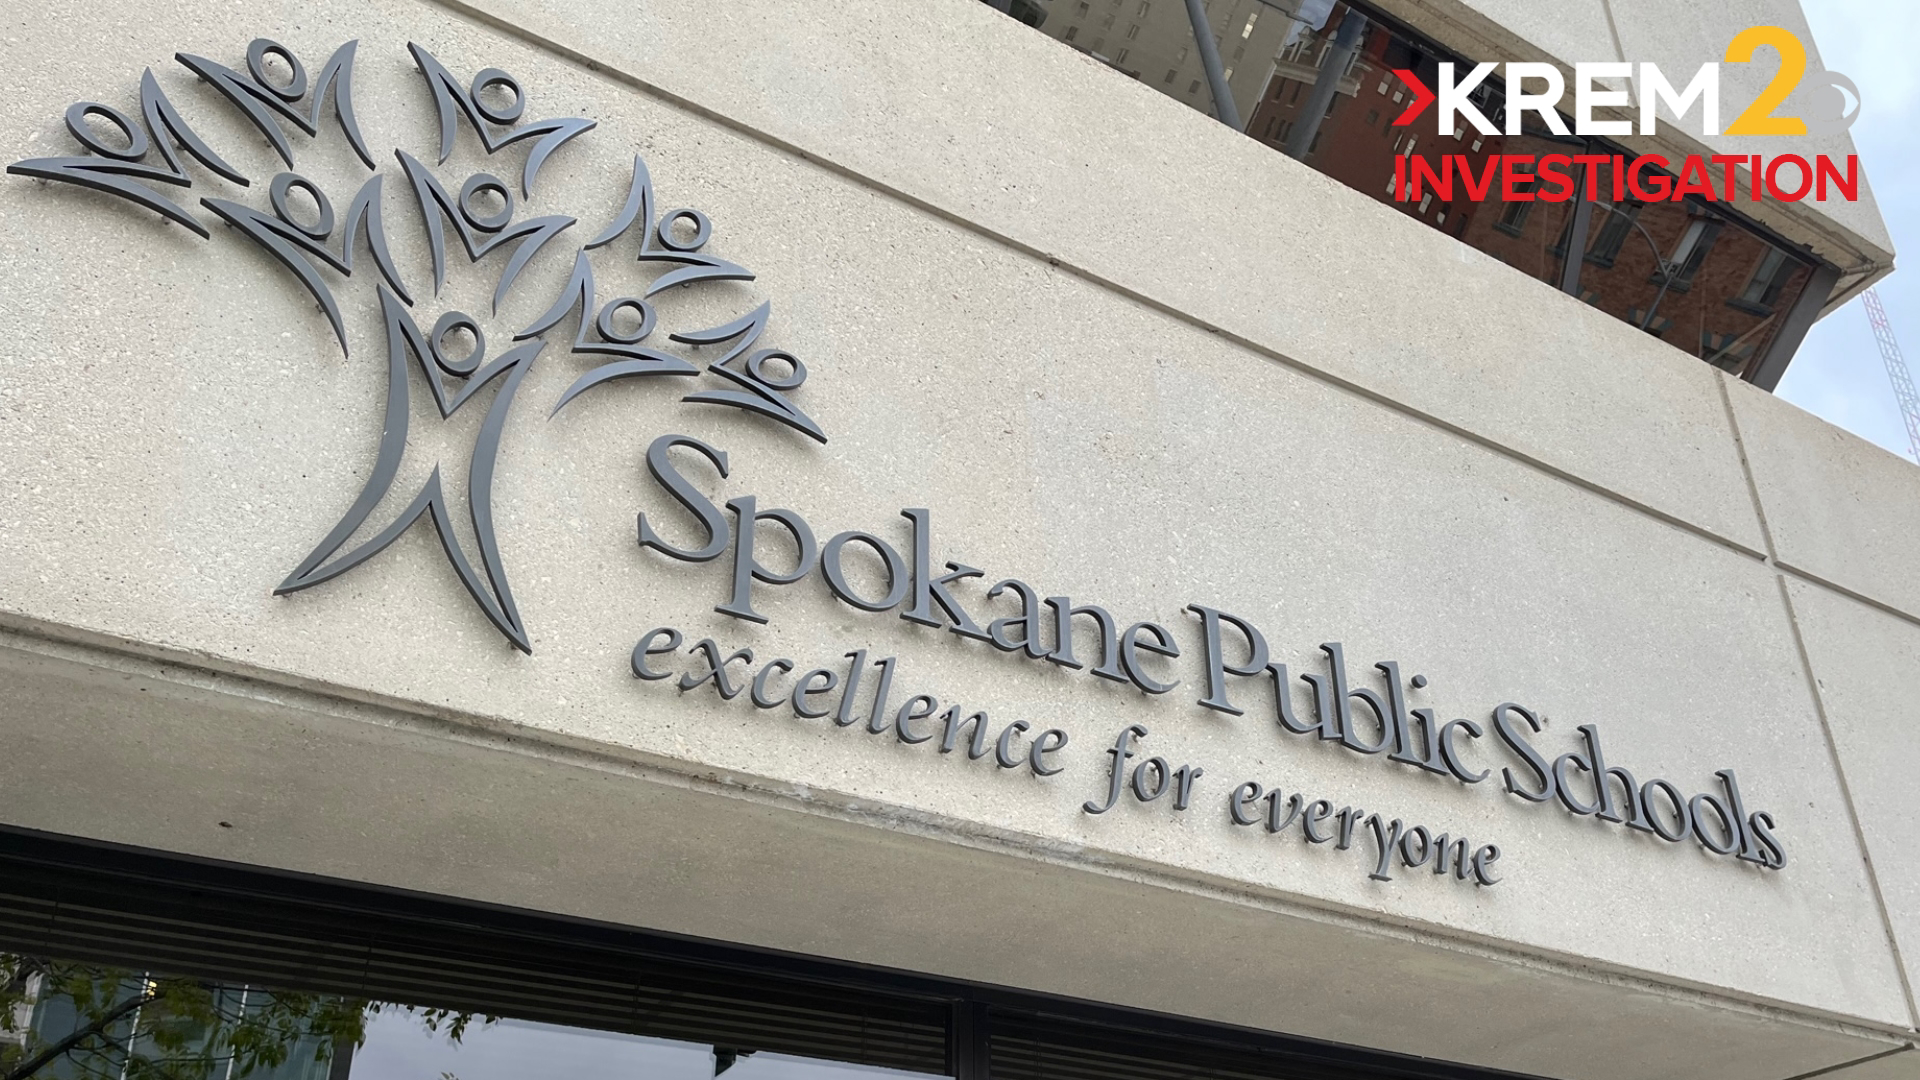 Earlier this month, Spokane Police Chief Craig Meidl said the district was failing to report crimes.